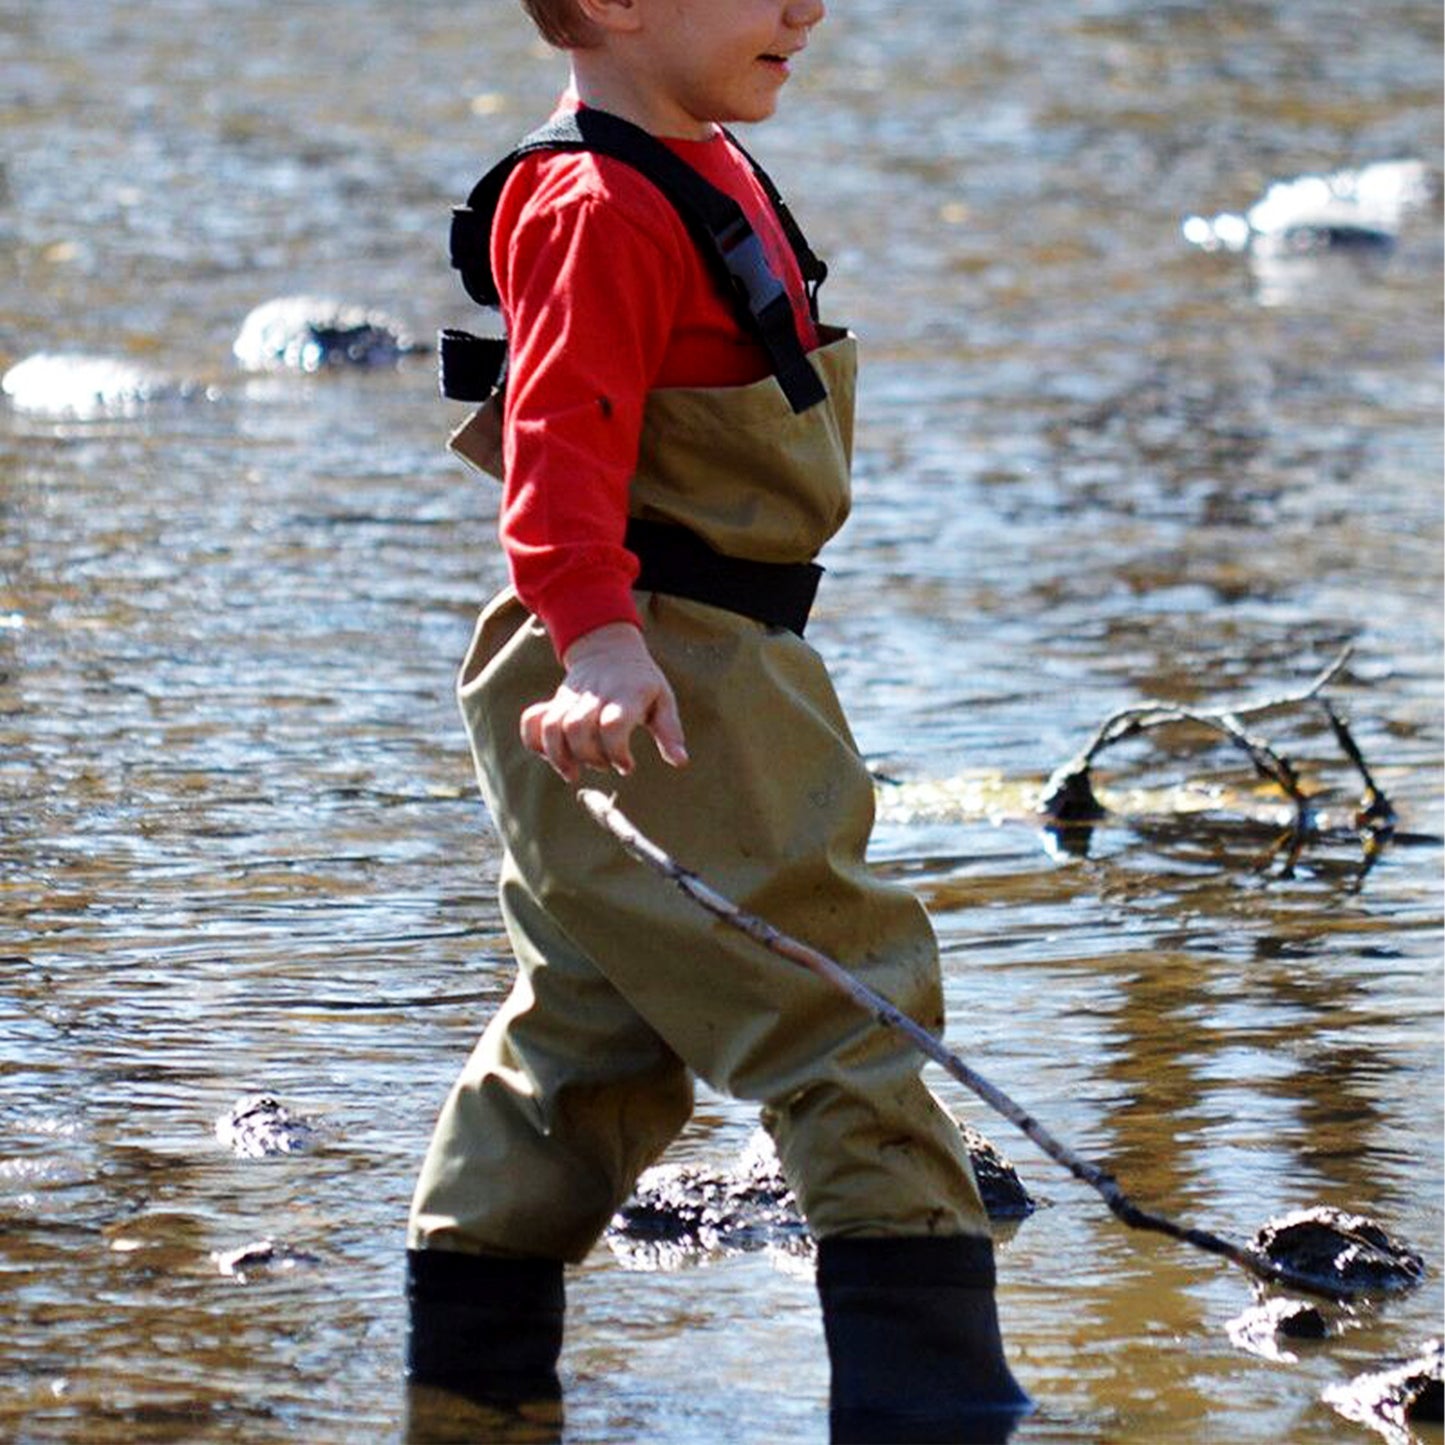 Oakiwear Breathable Youth Kids Chest Waders Children Toddler, Tan